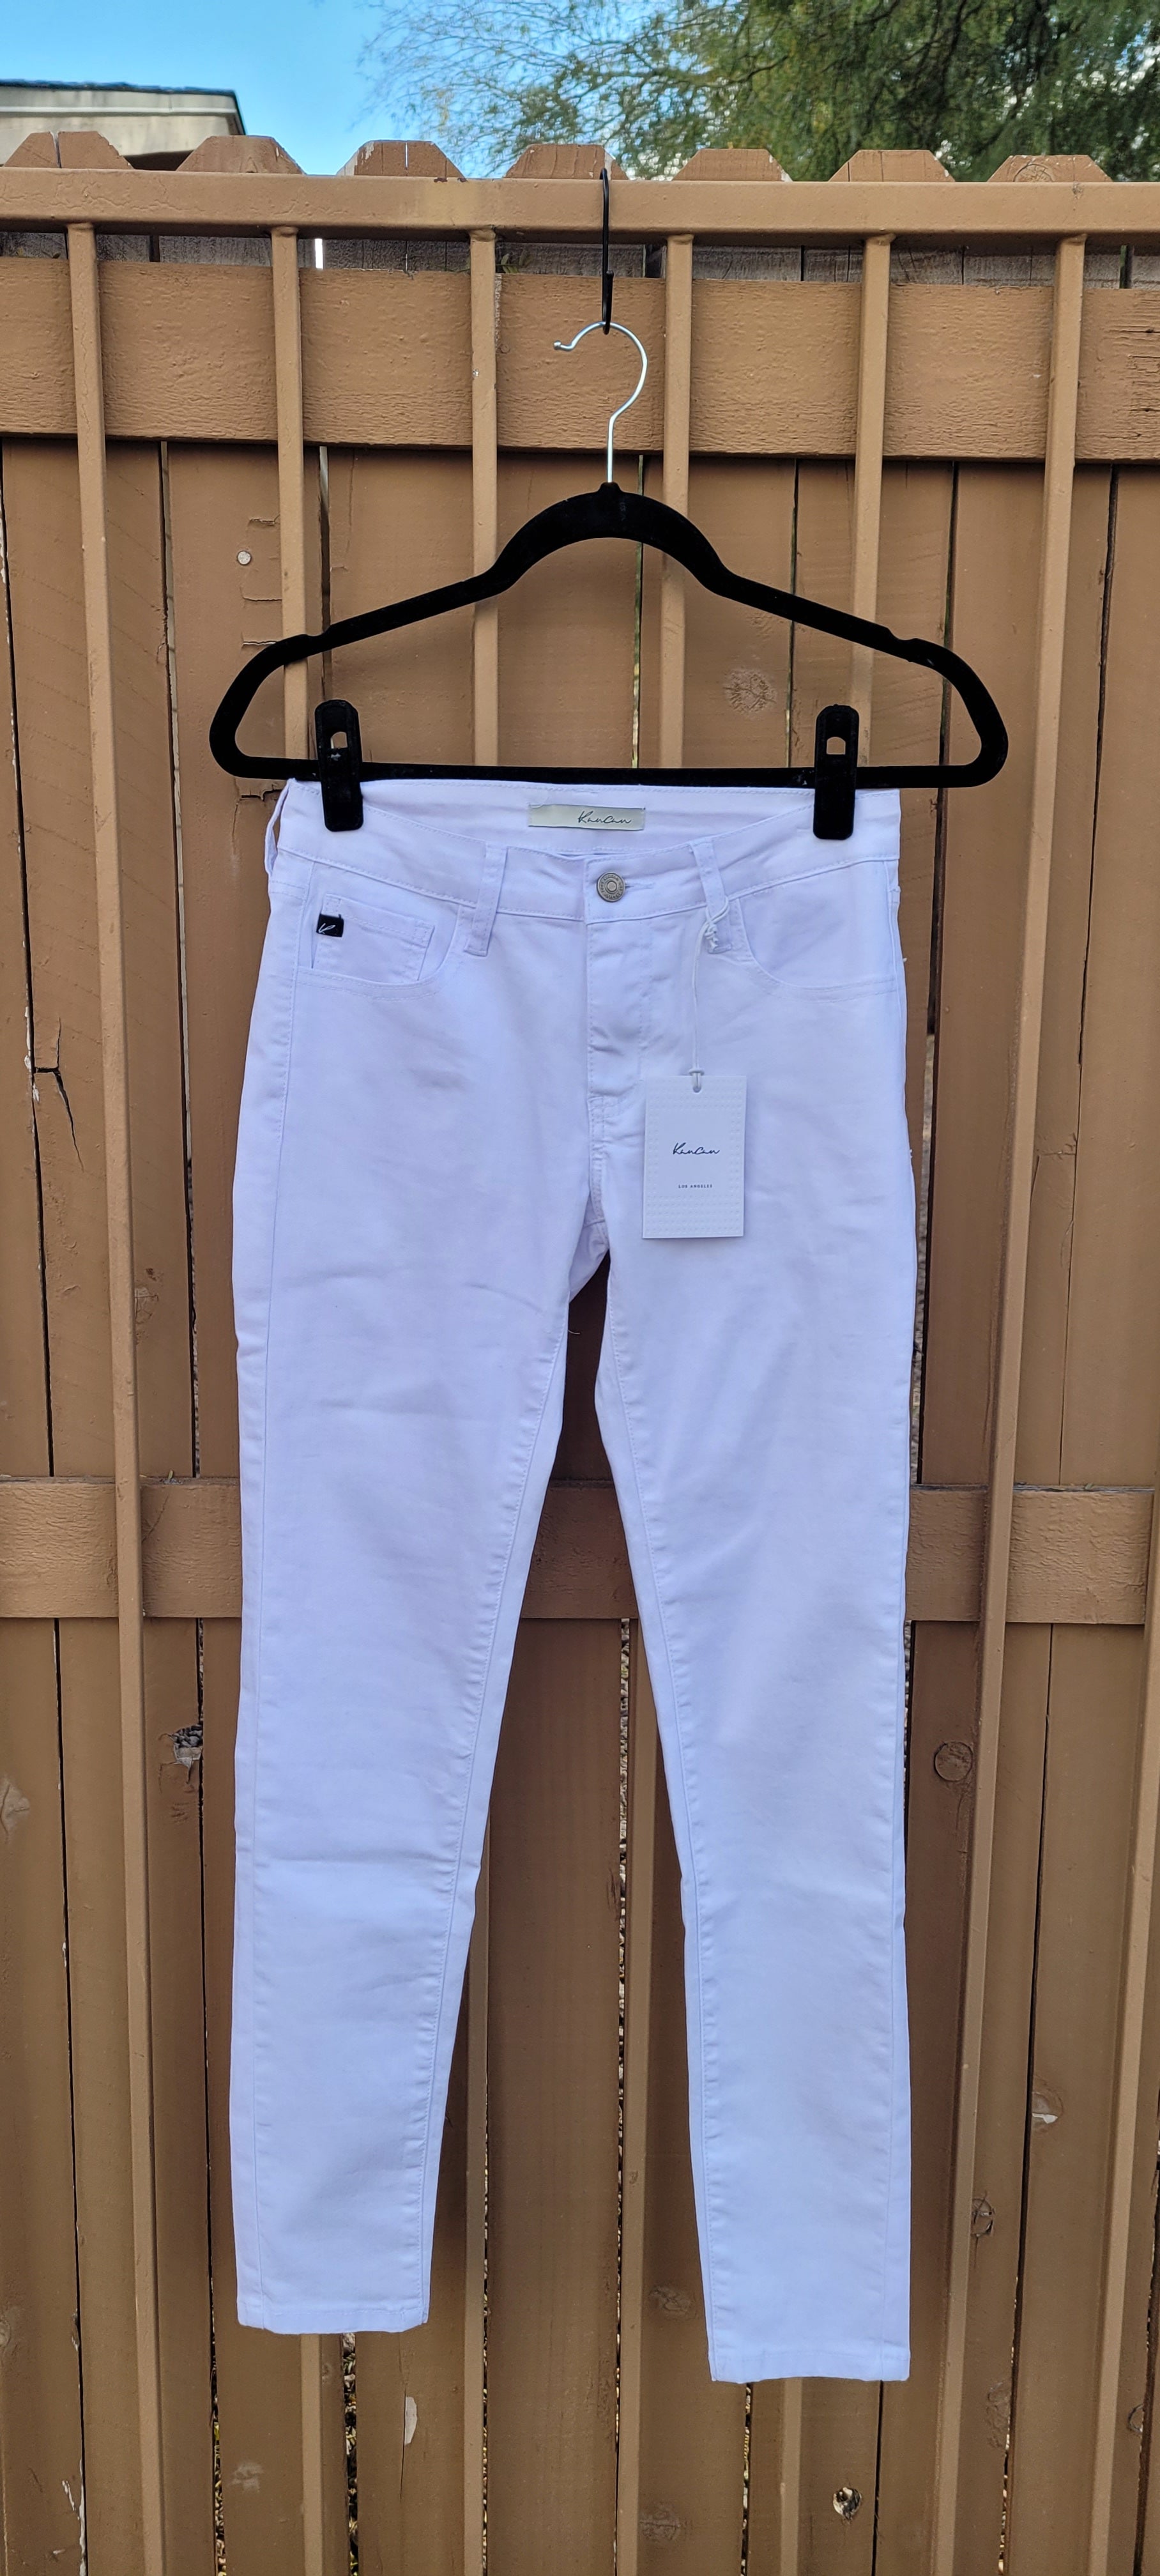 These cute white mid rise, ankle skinny jeans are nice and stretchy.  Please refer to photo below for stretch level. Great for everyday wear.  You can dress these jeans up or wear them as a casual piece.  You choose how you want to make a statement. Sizes 3/25, 5/26, 9/28, 11/29